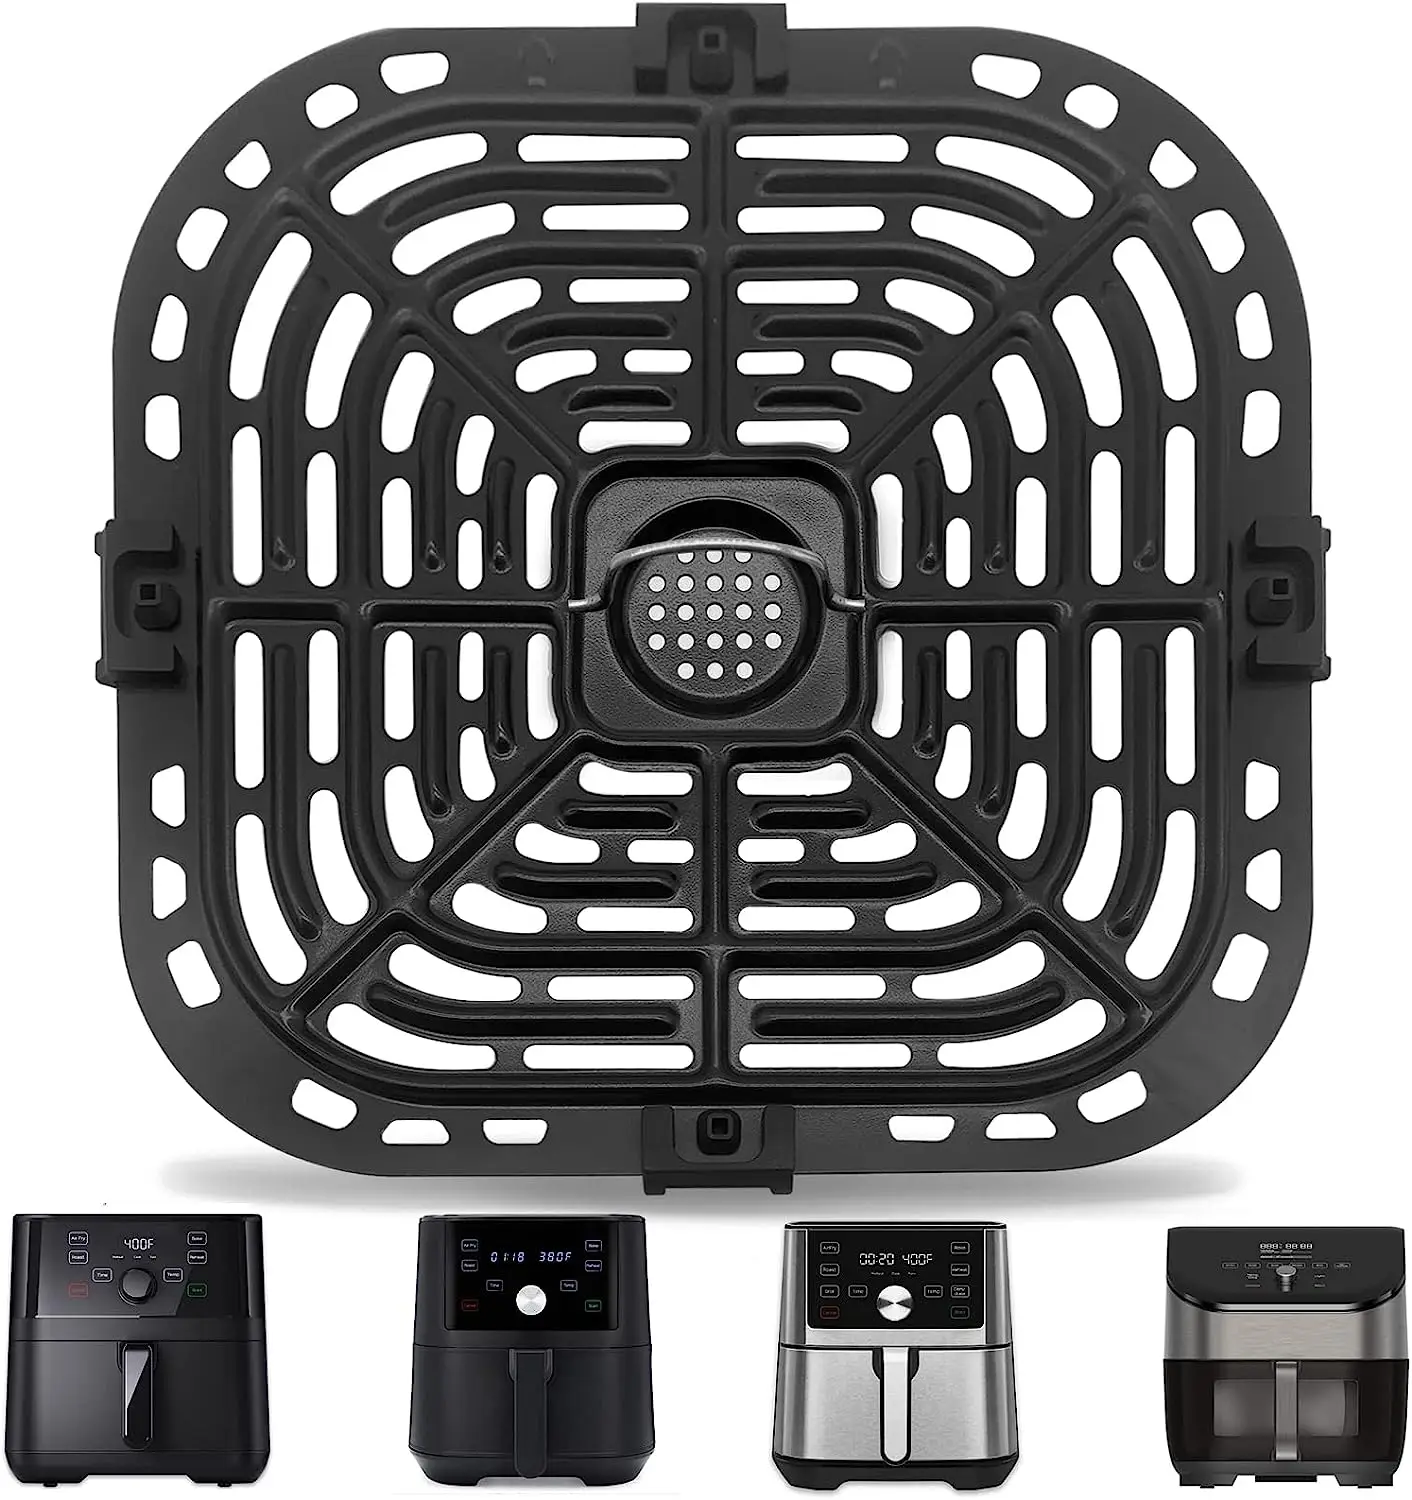 https://ae01.alicdn.com/kf/S86585633197e40e2ac40b0e10f04a013O/Air-Fryer-Grill-Pan-for-Instant-Pot-Vortex-6-QT-Air-Fryer-Accessories-Replacement-Tray-Rack.jpg